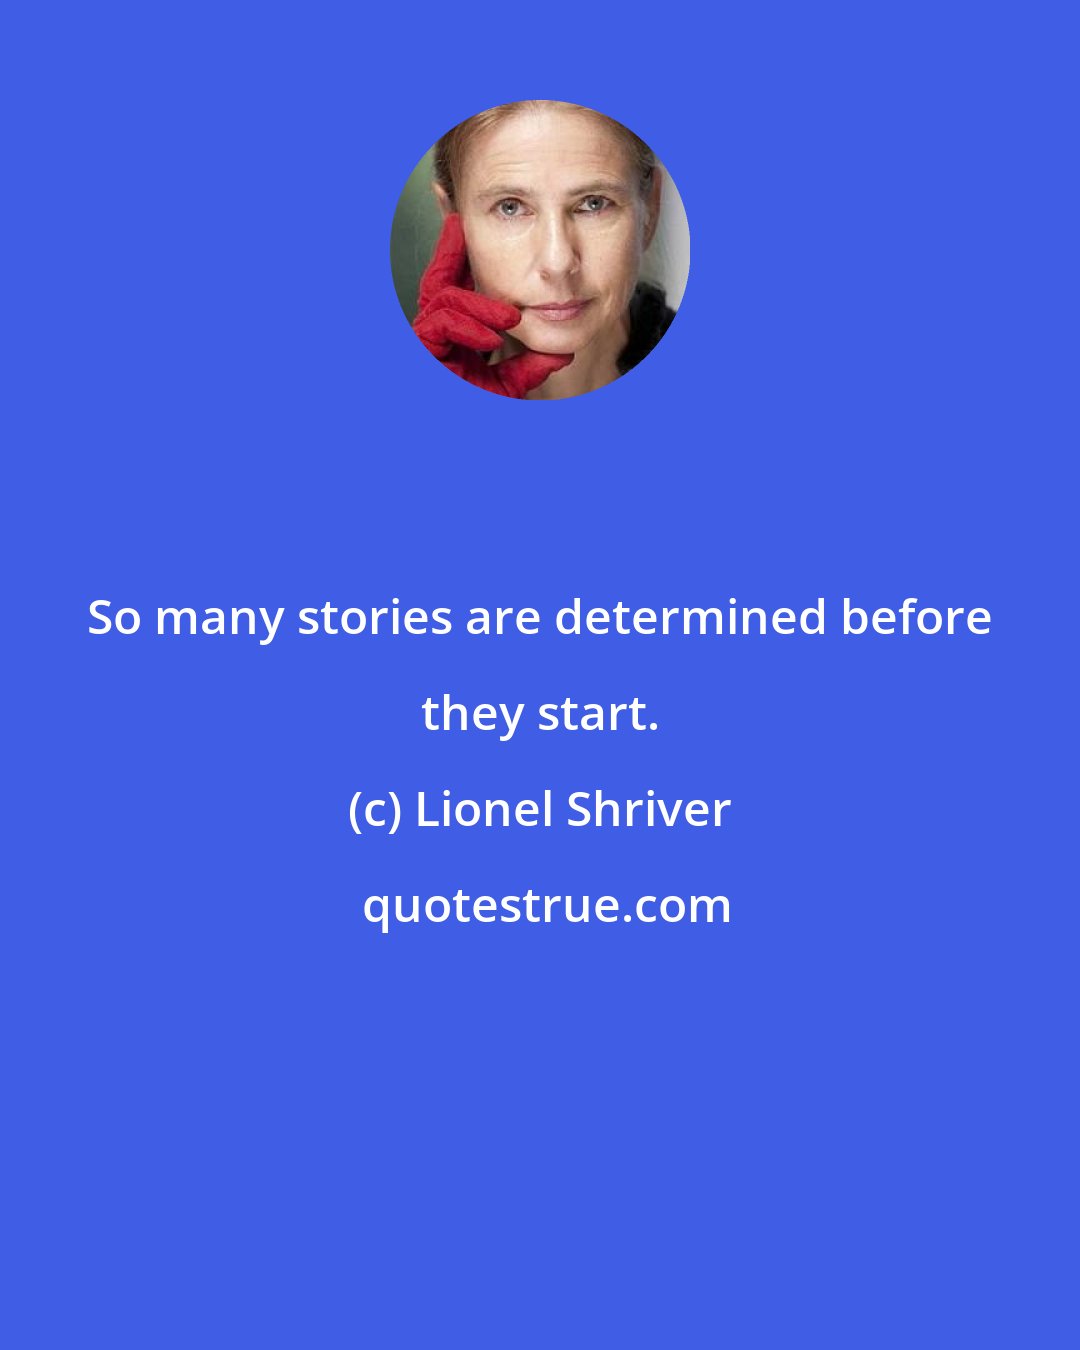 Lionel Shriver: So many stories are determined before they start.